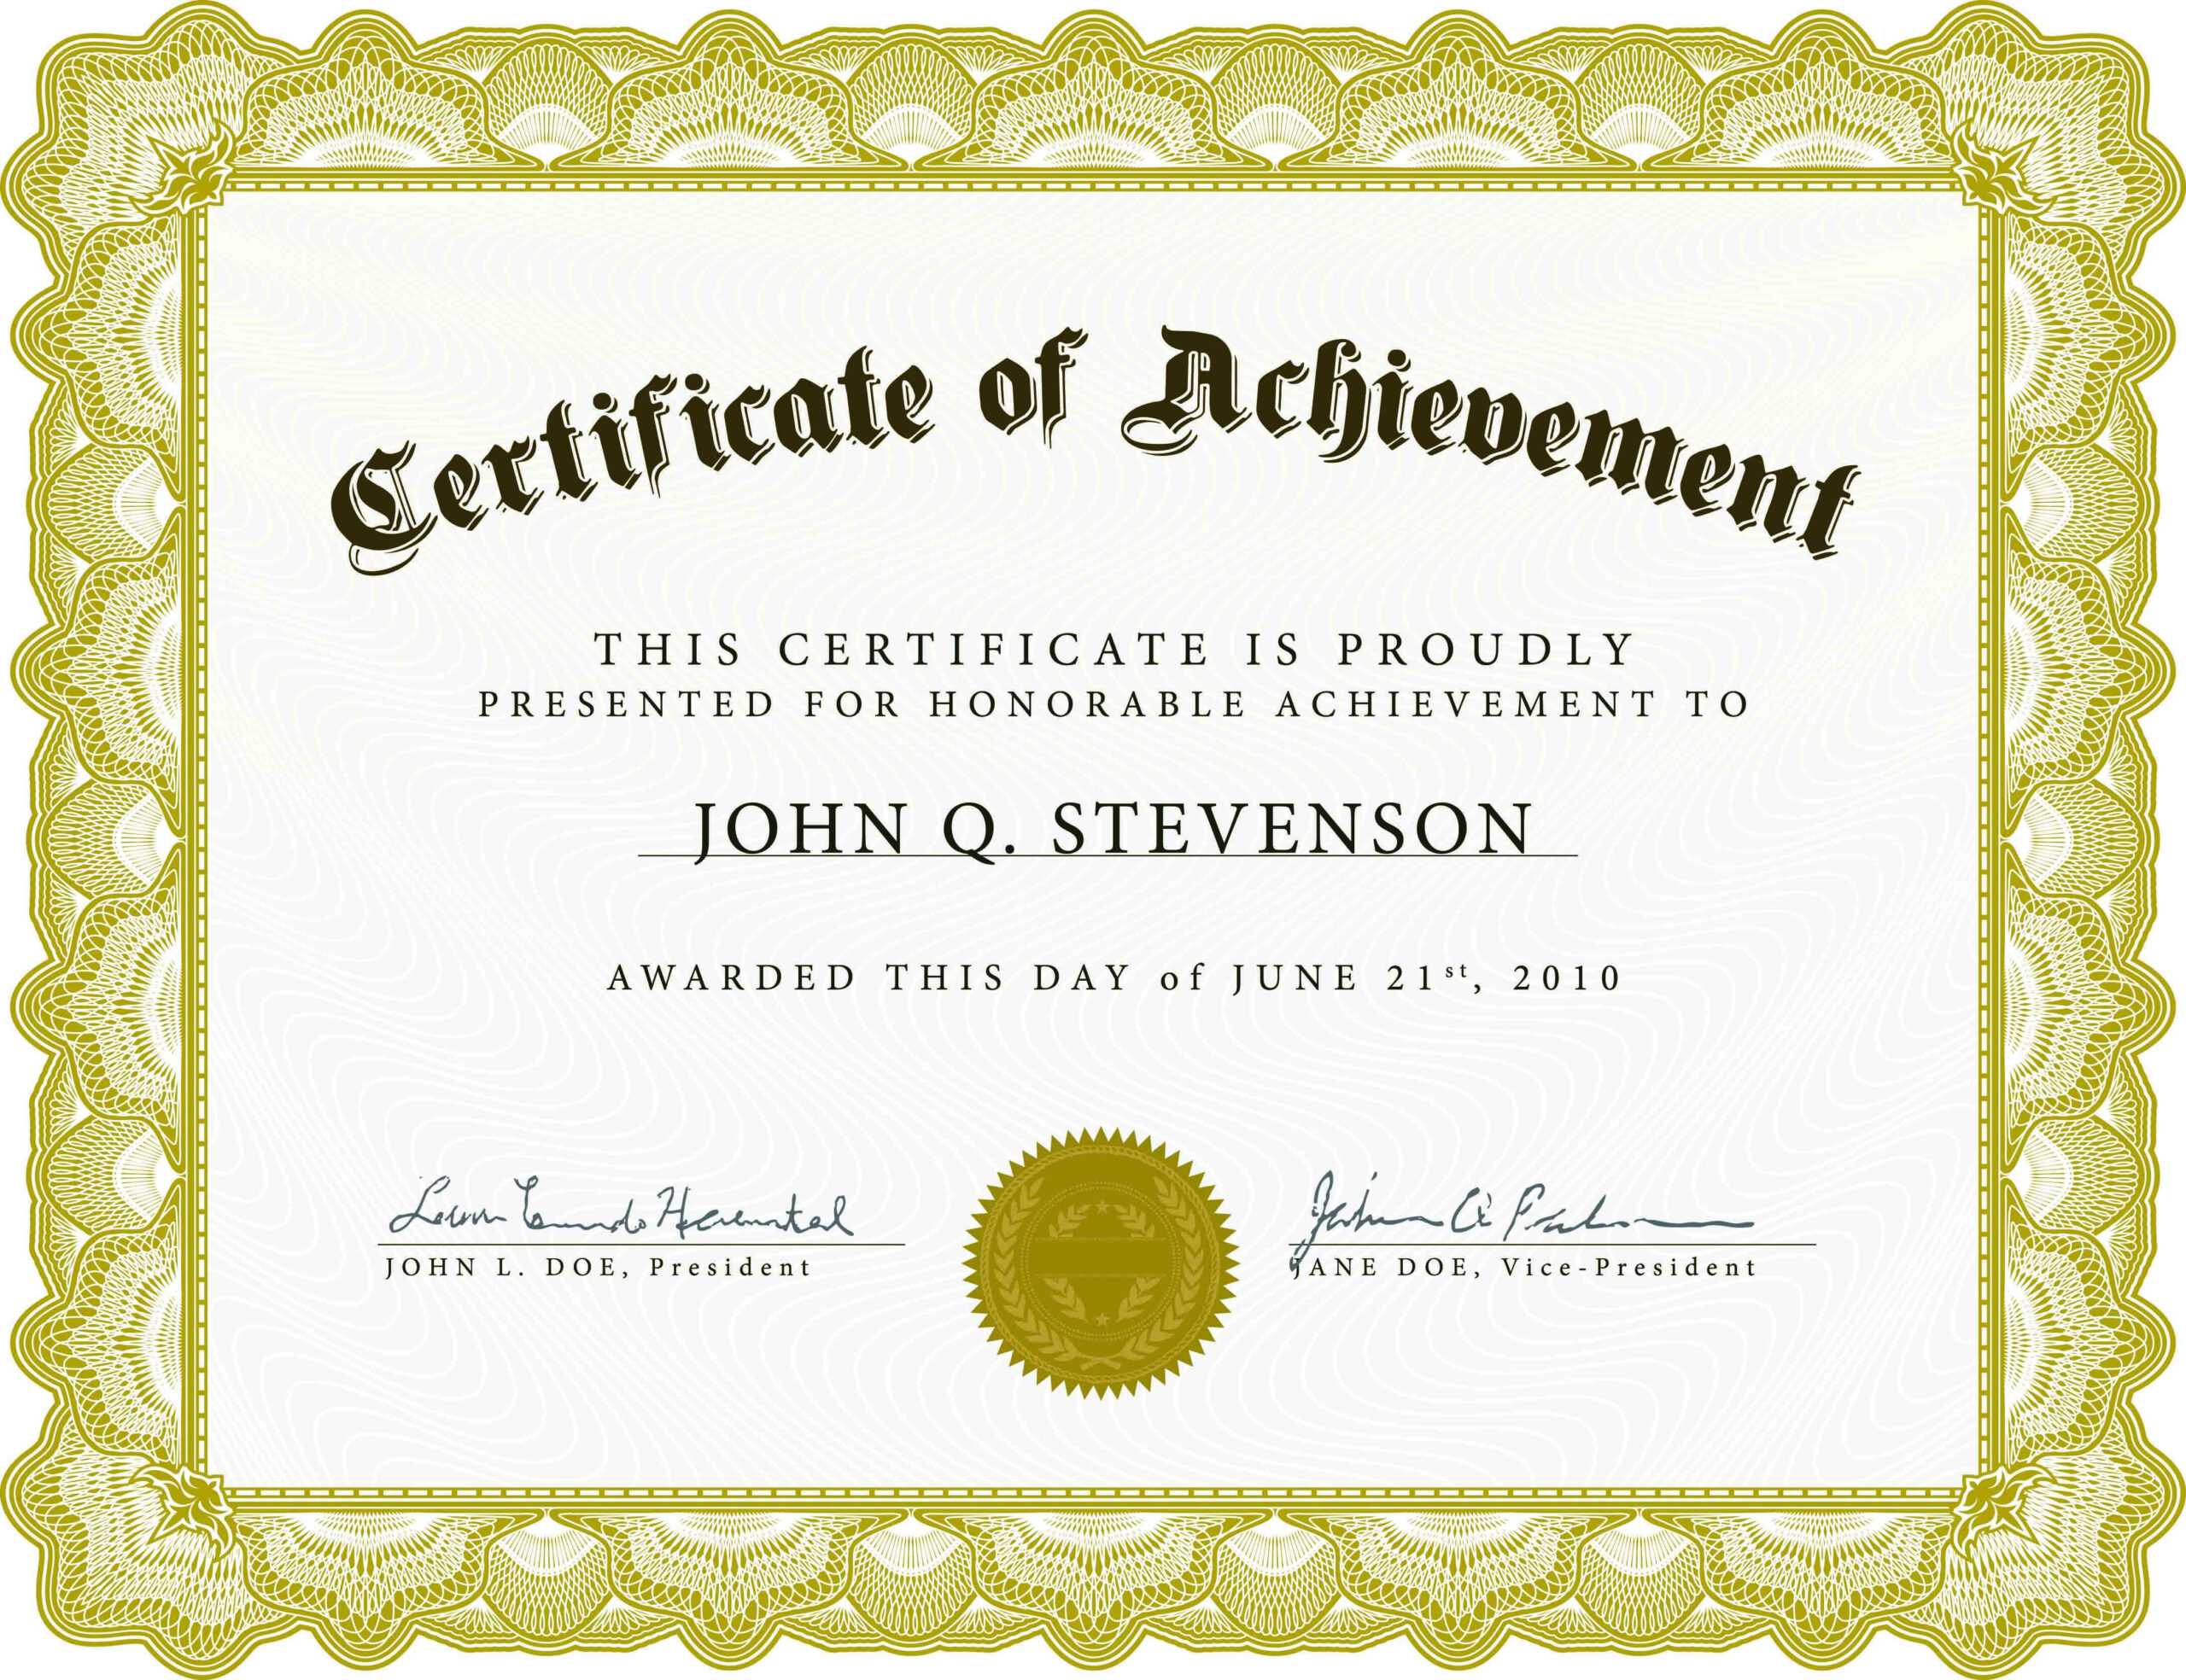 Employee Of The Month Certificate Sample – Calep.midnightpig.co Regarding Employee Of The Month Certificate Template With Picture